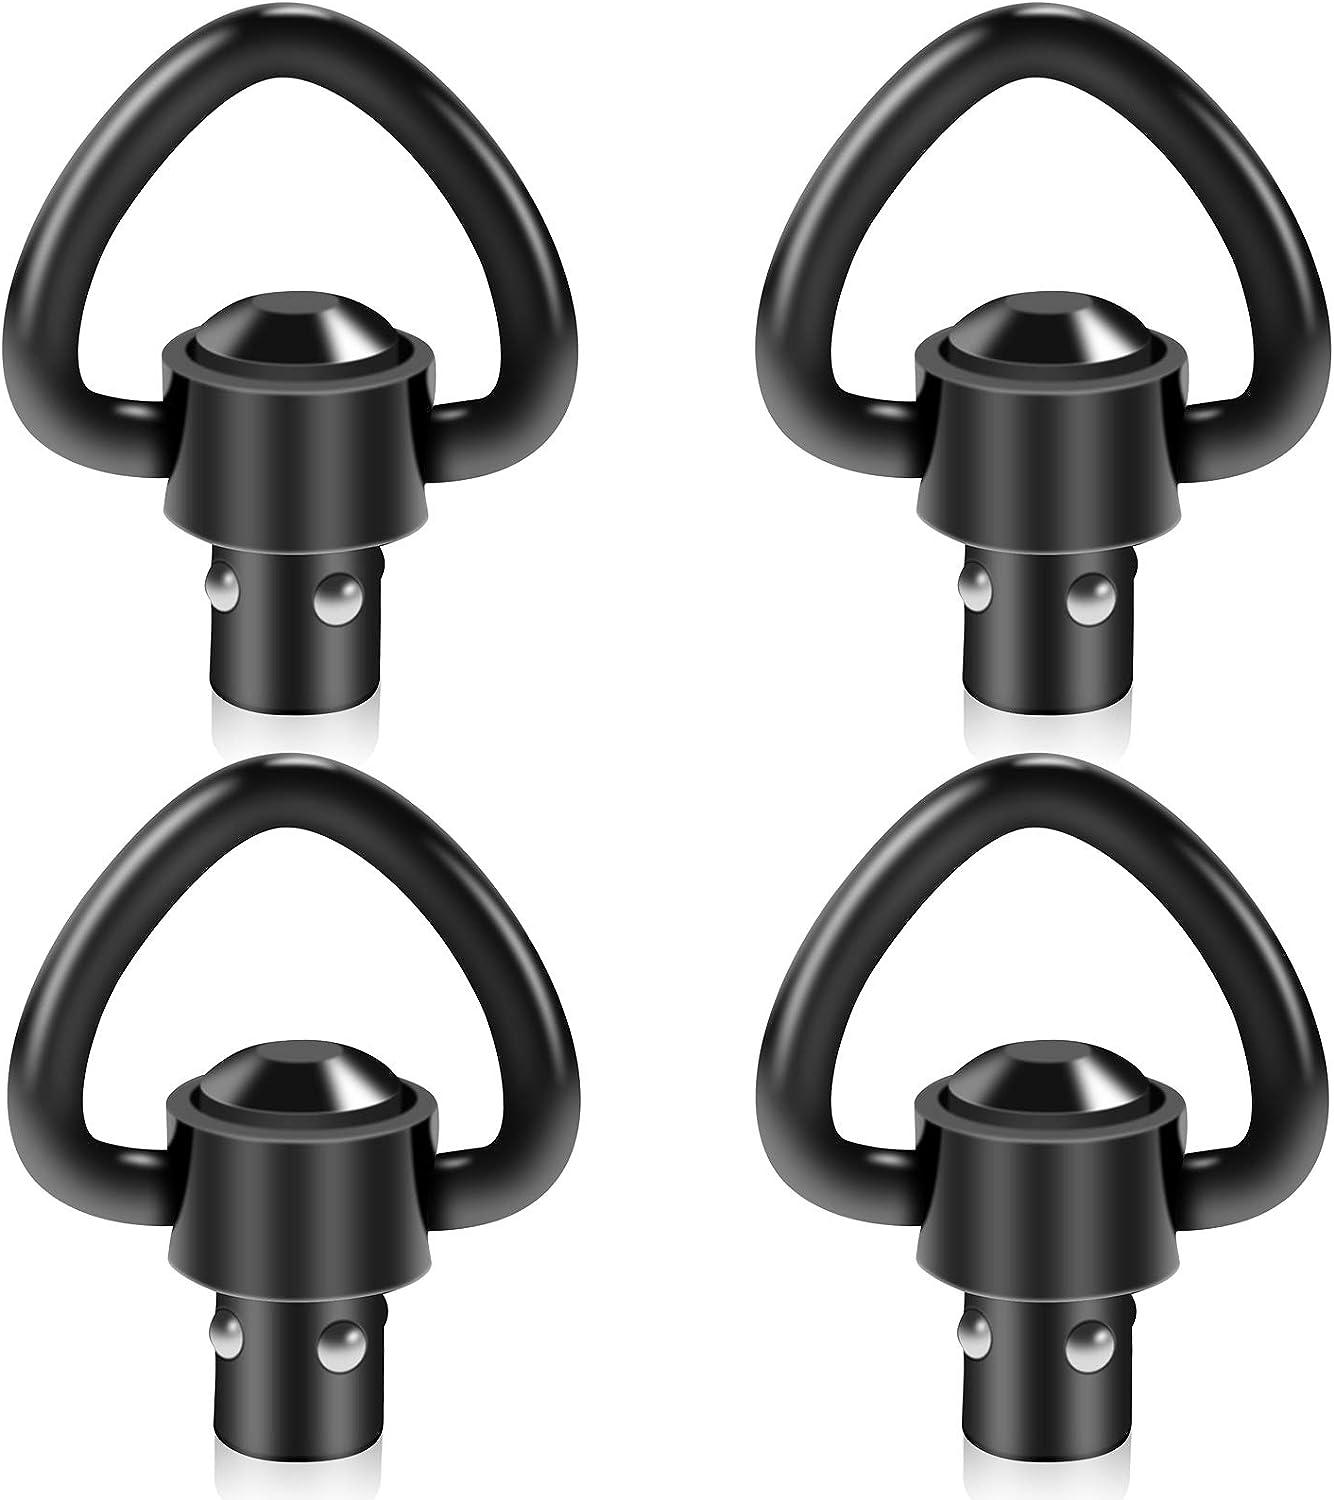 FANGOSS 4 Pcs 1 QD Sling Swivels with 1 Inch Push Button Quick Detach  Triangle Loop for Two Point and Traditional Sling Swivel Mount - Black